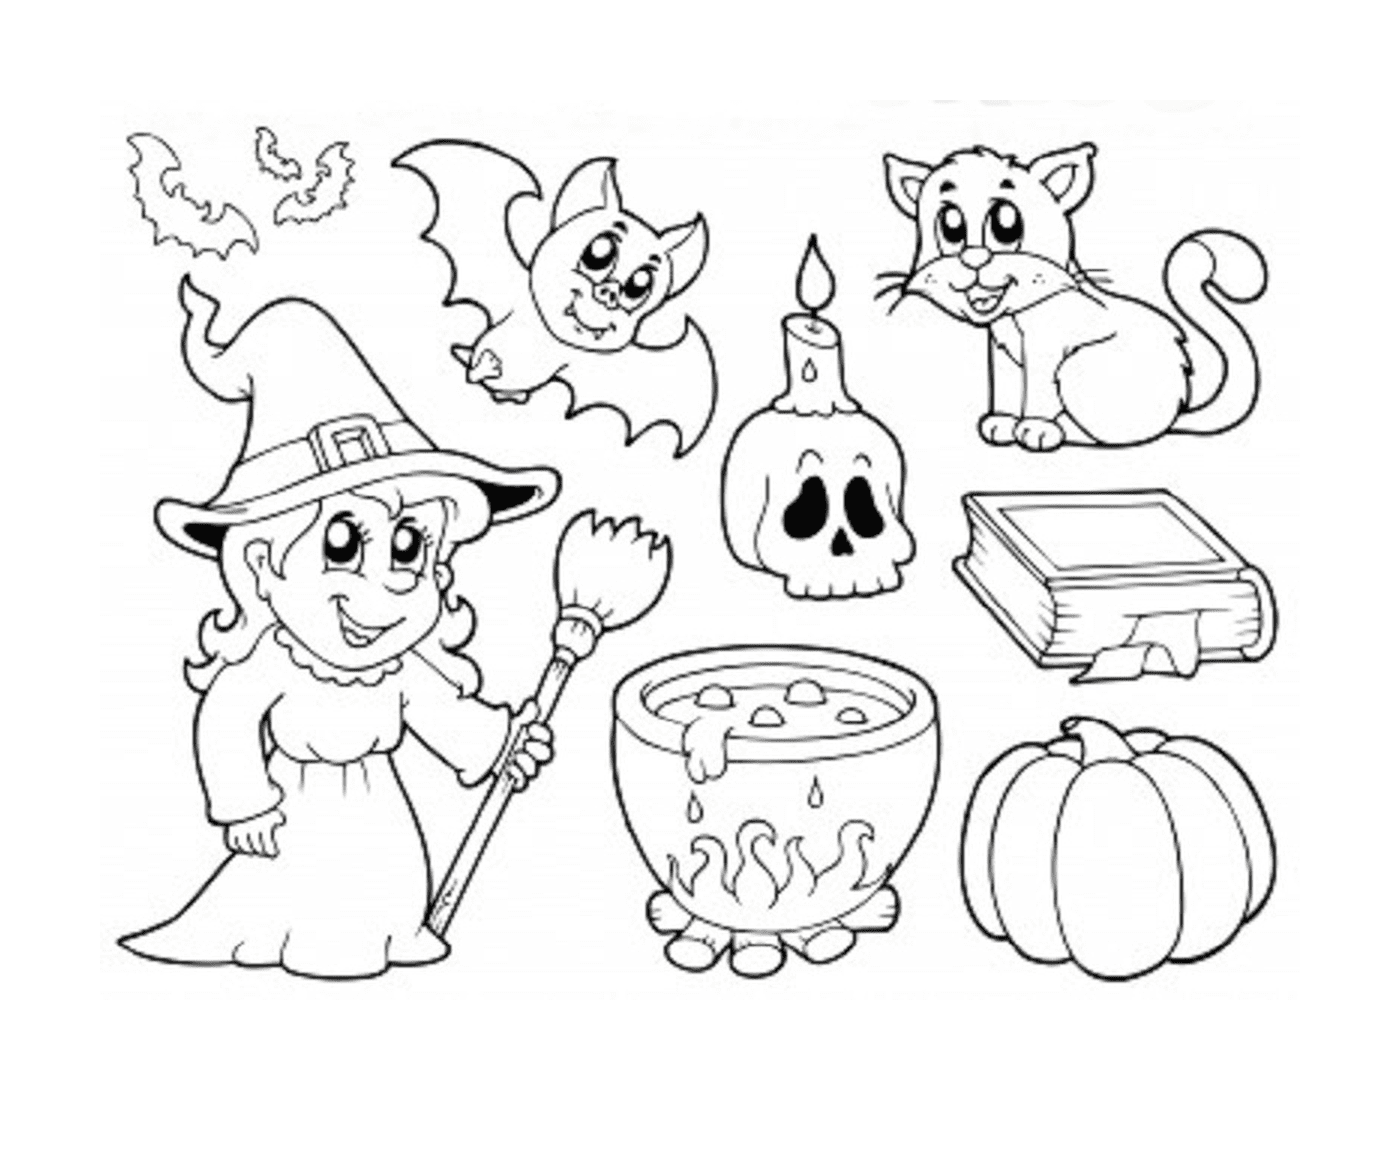  witch and cat in the picture 